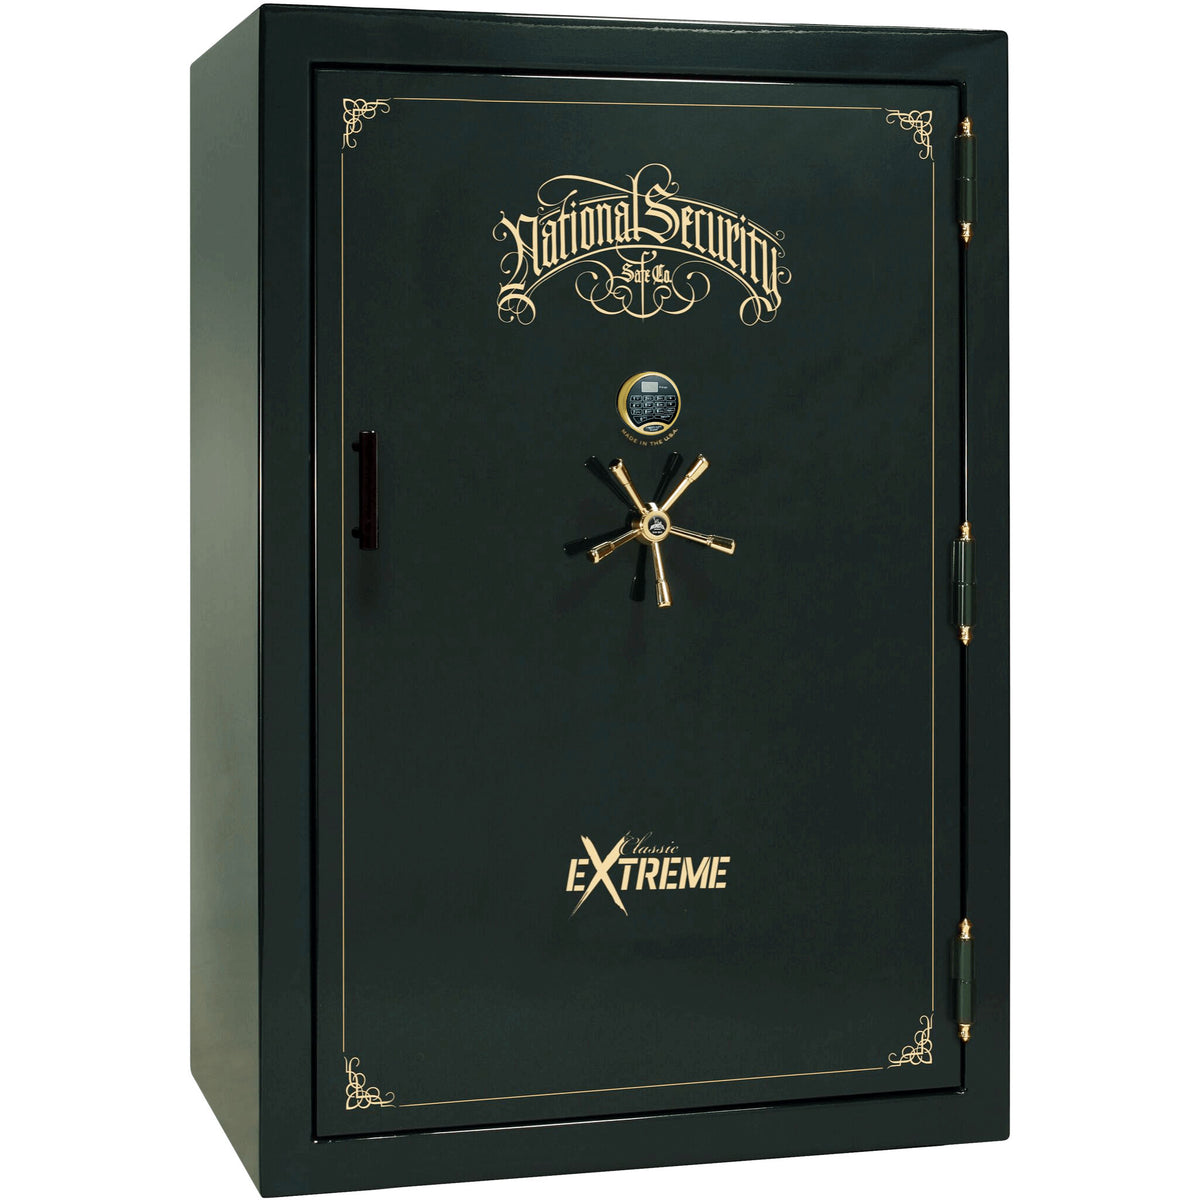 Liberty Classic Select Extreme Wide Body Safe in Green Gloss with Brass Electronic Lock.